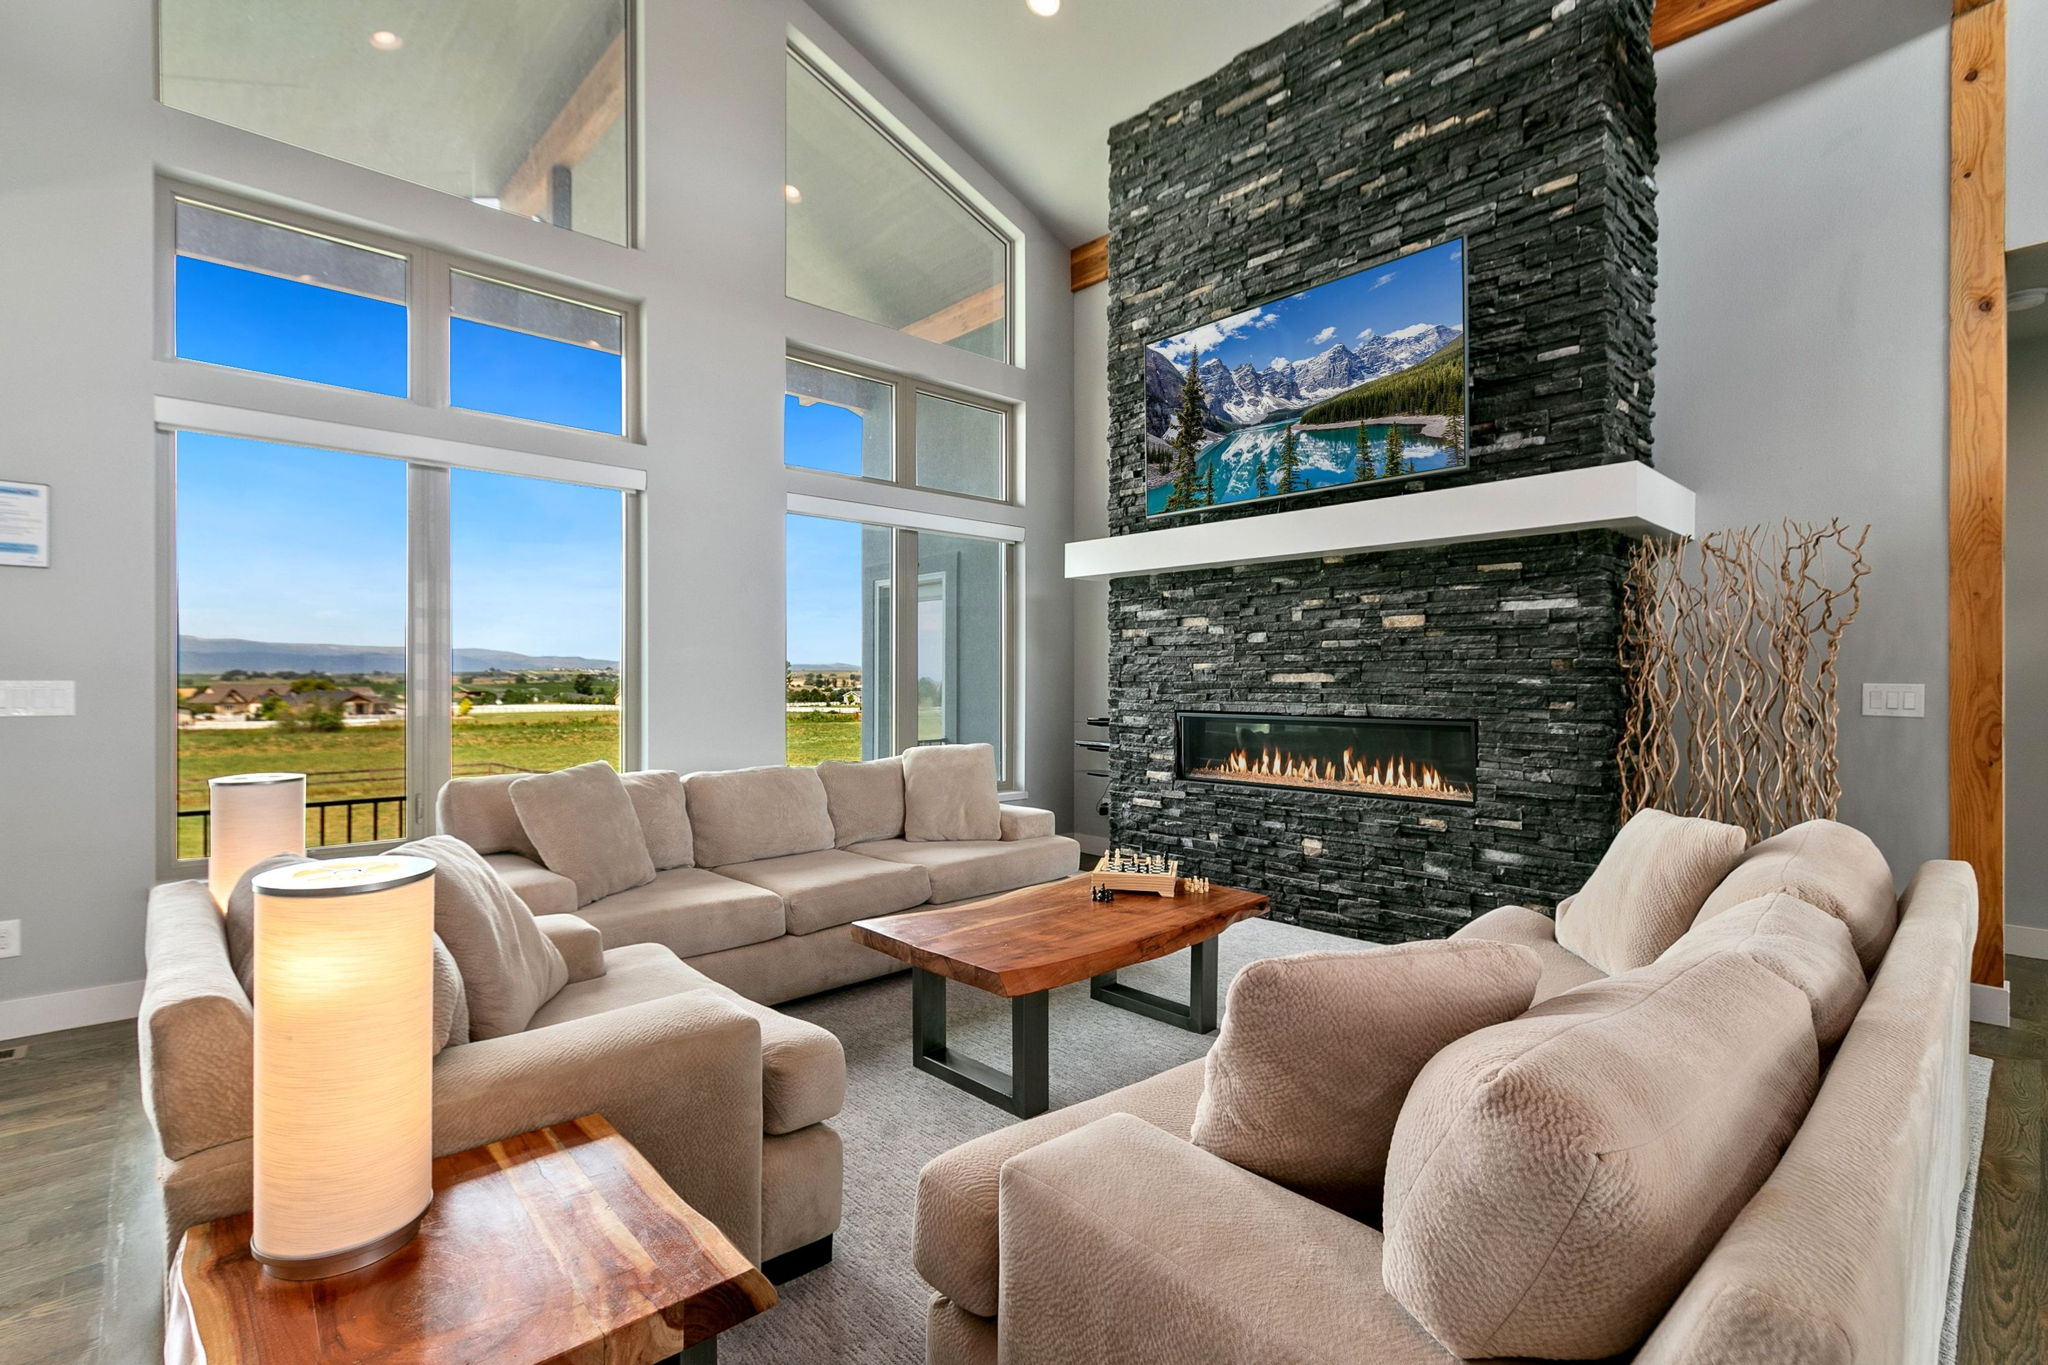 Cozy Living Area with Vaulted Ceilings | Smart TV, Fireplace and tons of comfortable seating!